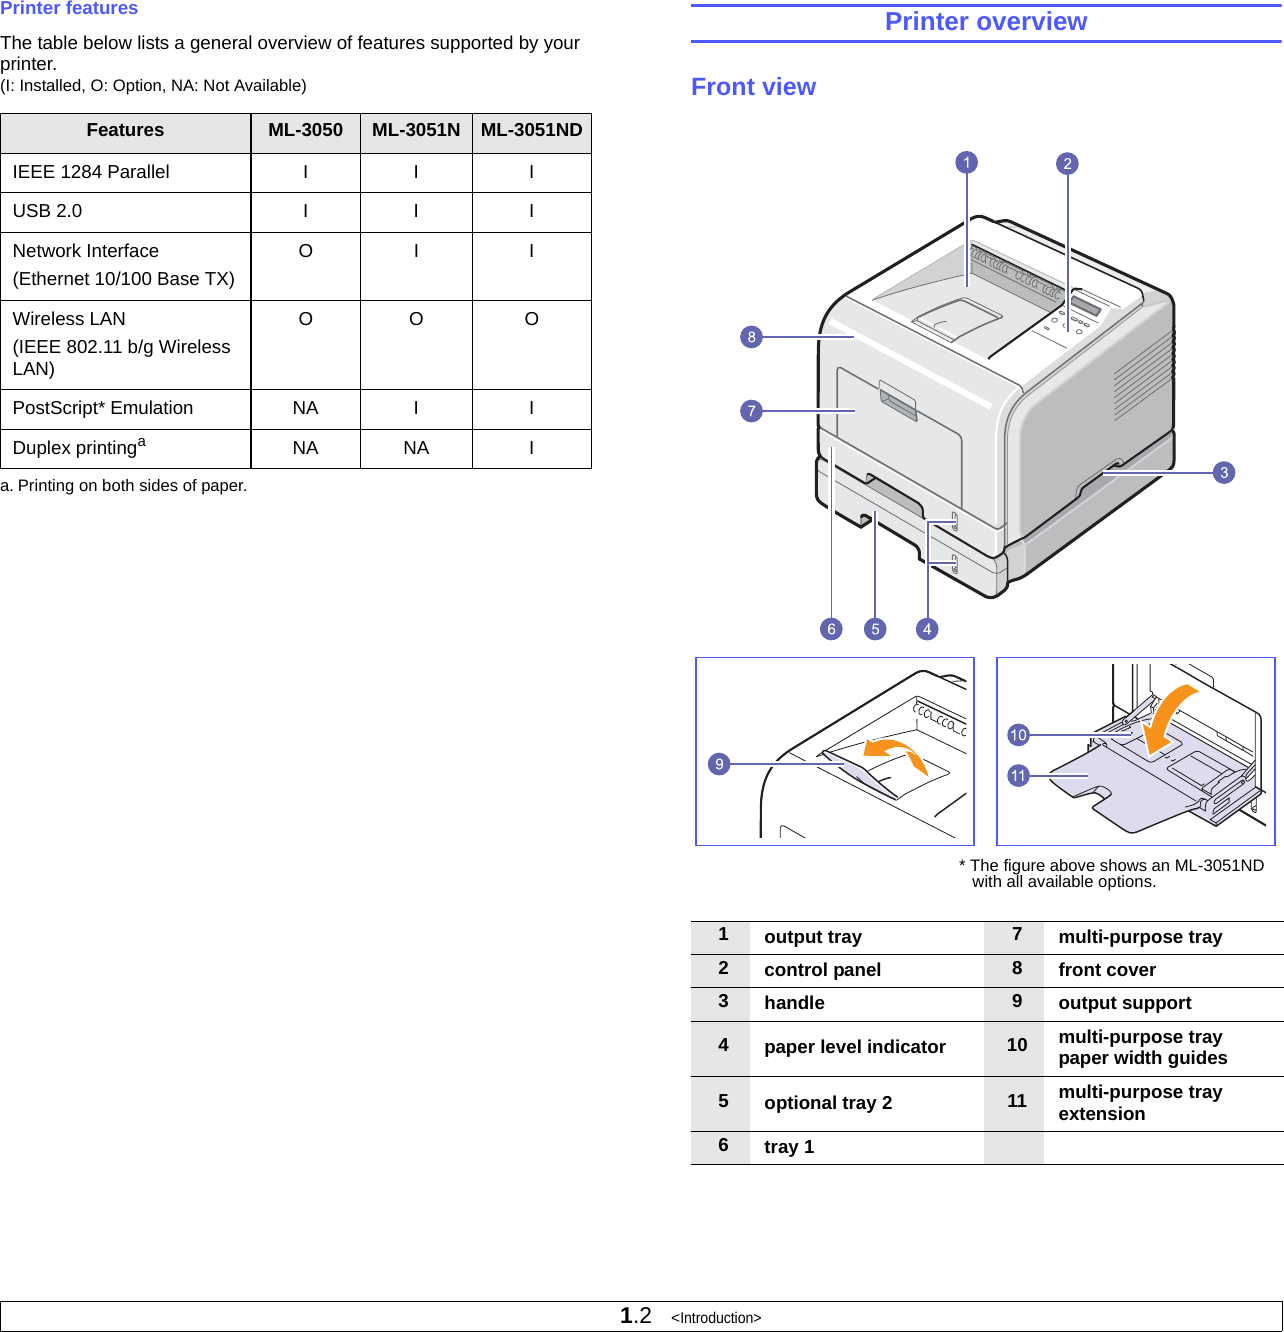 1.2   &lt;Introduction&gt;Printer featuresThe table below lists a general overview of features supported by your printer.(I: Installed, O: Option, NA: Not Available)Features ML-3050 ML-3051N ML-3051NDIEEE 1284 Parallel I I IUSB 2.0 I I INetwork Interface(Ethernet 10/100 Base TX)OI IWireless LAN(IEEE 802.11 b/g Wireless LAN)OO OPostScript* Emulation NA I IDuplex printingaa. Printing on both sides of paper.NA NA IPrinter overviewFront view1output tray 7multi-purpose tray2control panel 8front cover3handle 9output support4paper level indicator 10 multi-purpose tray paper width guides5optional tray 2 11 multi-purpose tray extension6tray 1* The figure above shows an ML-3051ND with all available options.